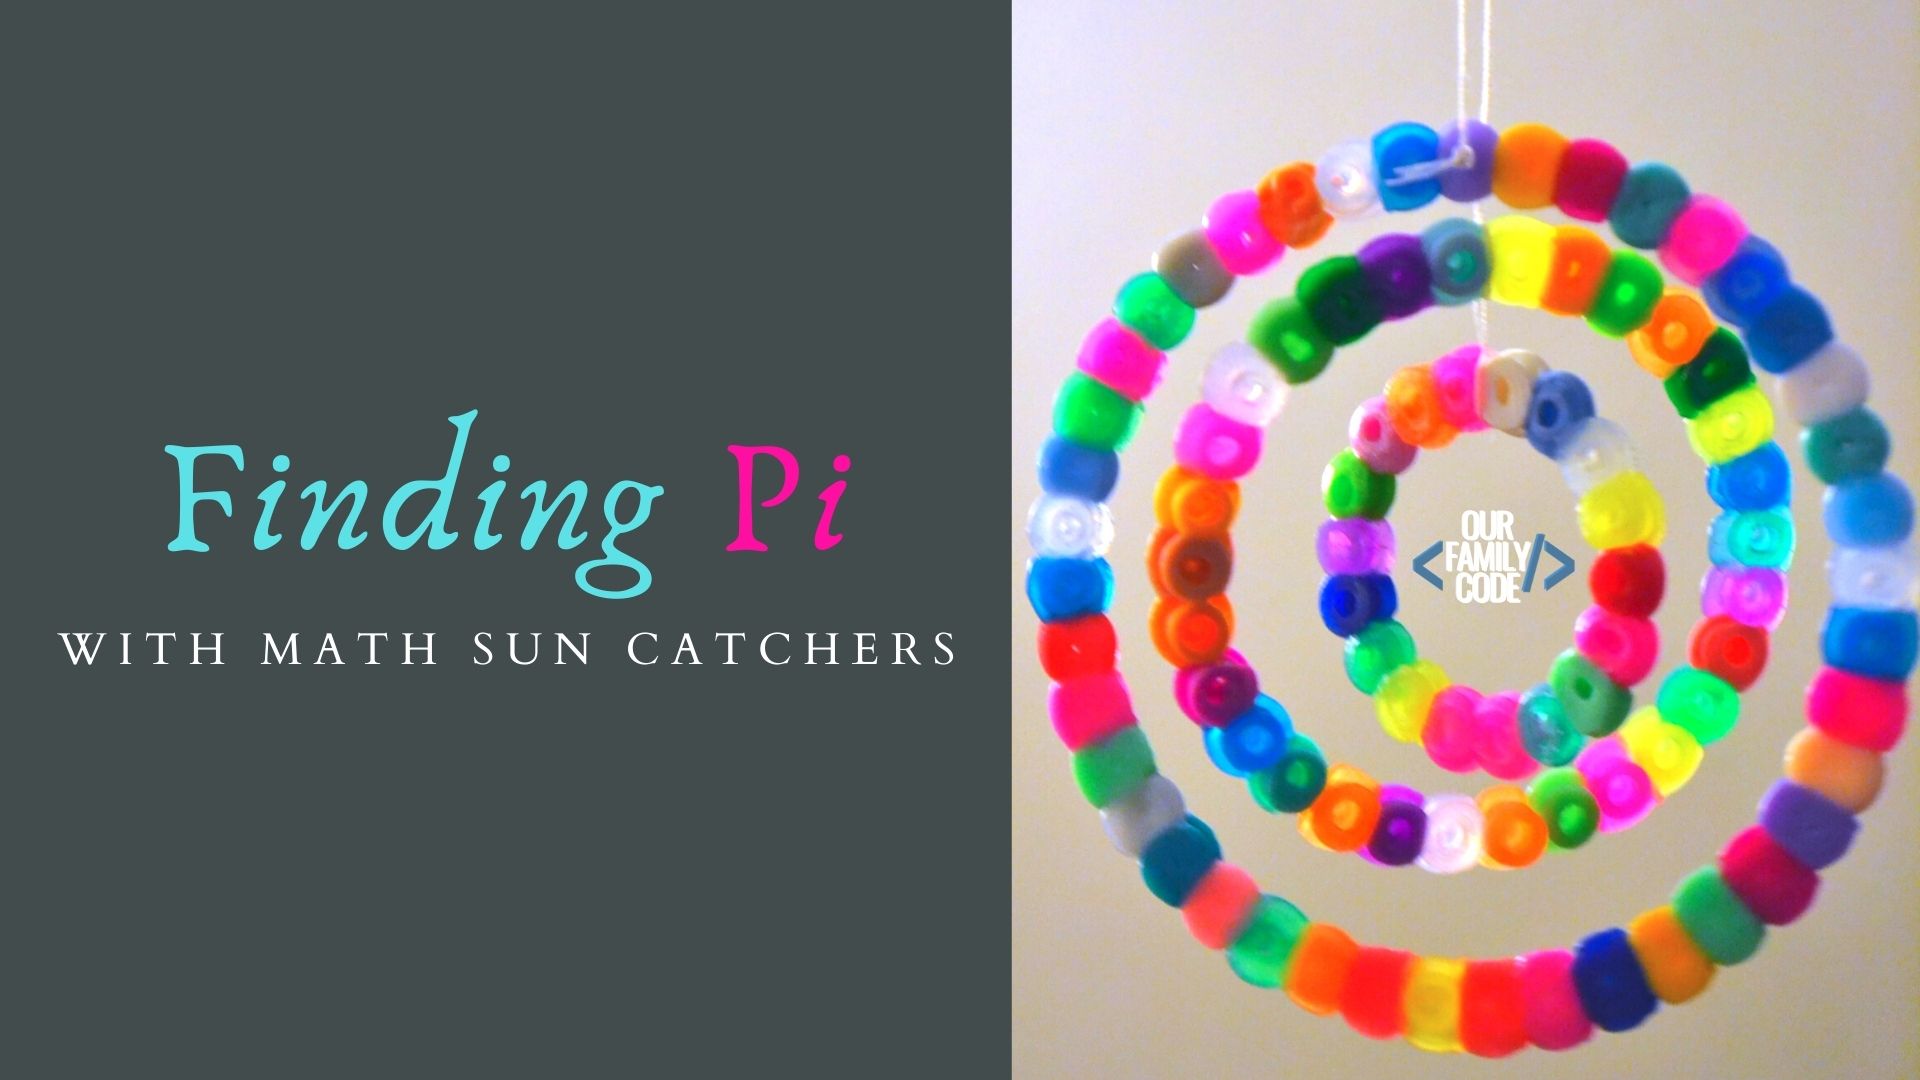 The goal of this activity is to explore the number Pi and prove that it is a mathematical constant by making math sun catchers out of fuse beads for a fun math + art STEAM activity! #STEAM #PiDay #Fibonacci #mathforkids #mathart #craftsforkids #STEM #homeschool